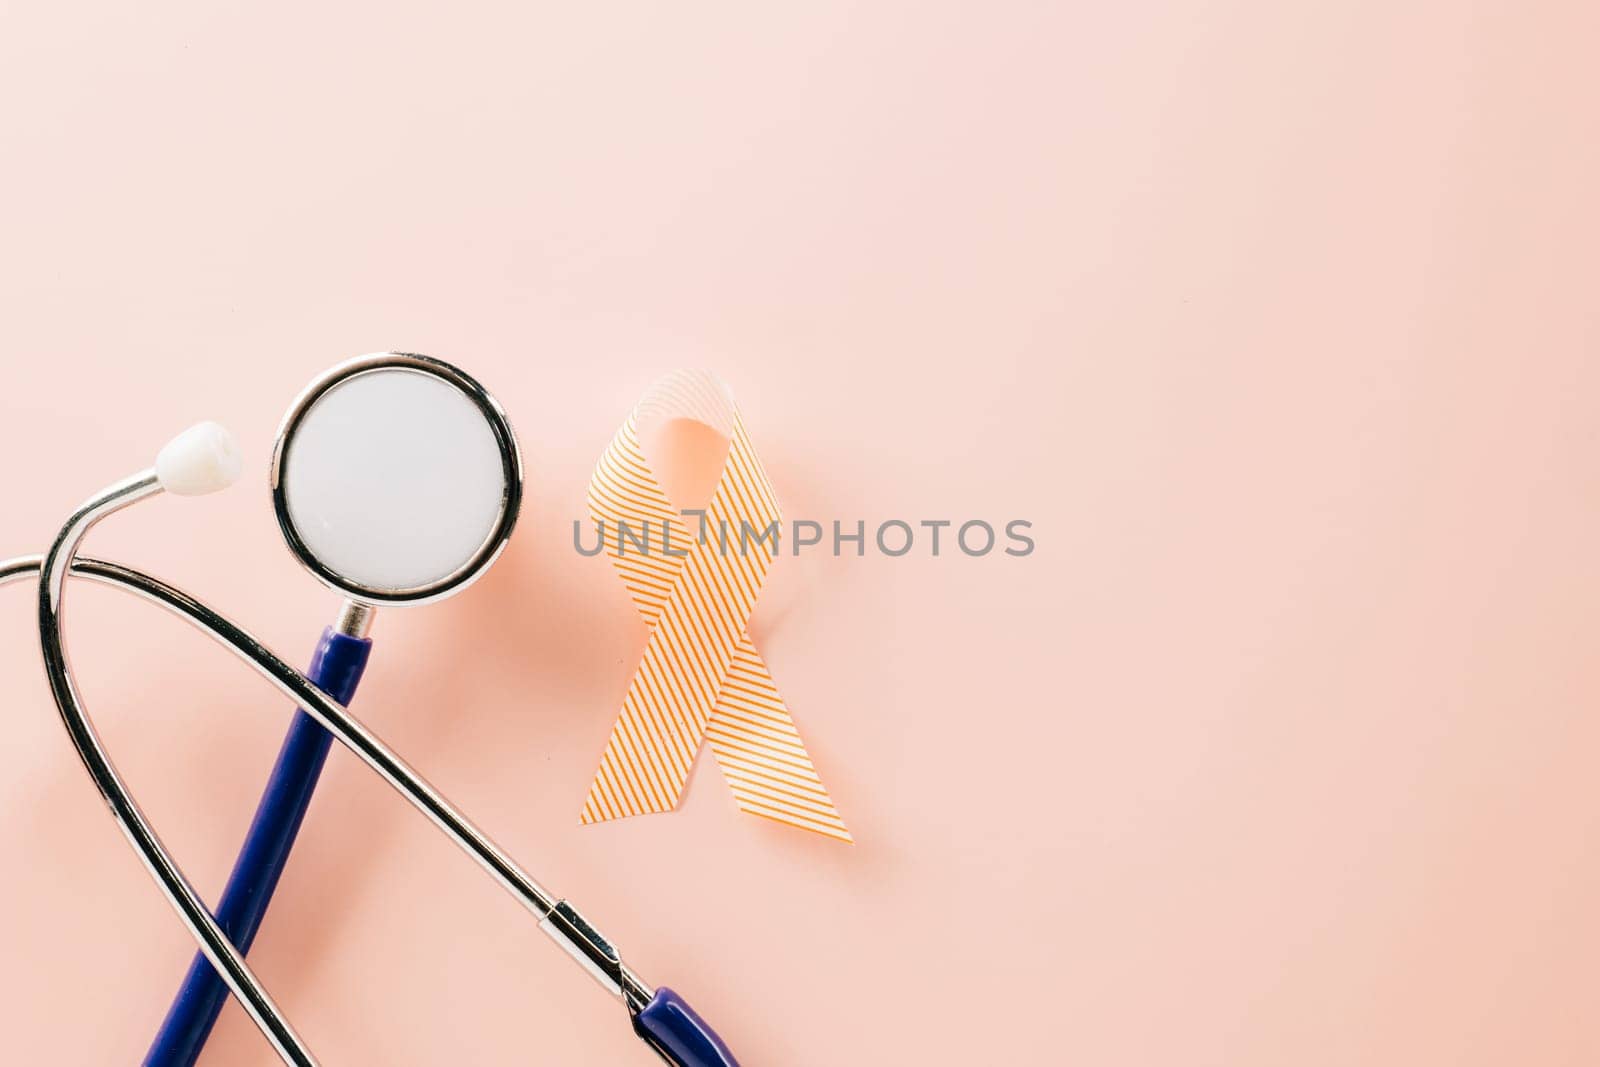 Pink awareness ribbon sign and stethoscope of International World Cancer Day campaign month on pastel pink background with copy space, concept of medical and health care support, 4 February